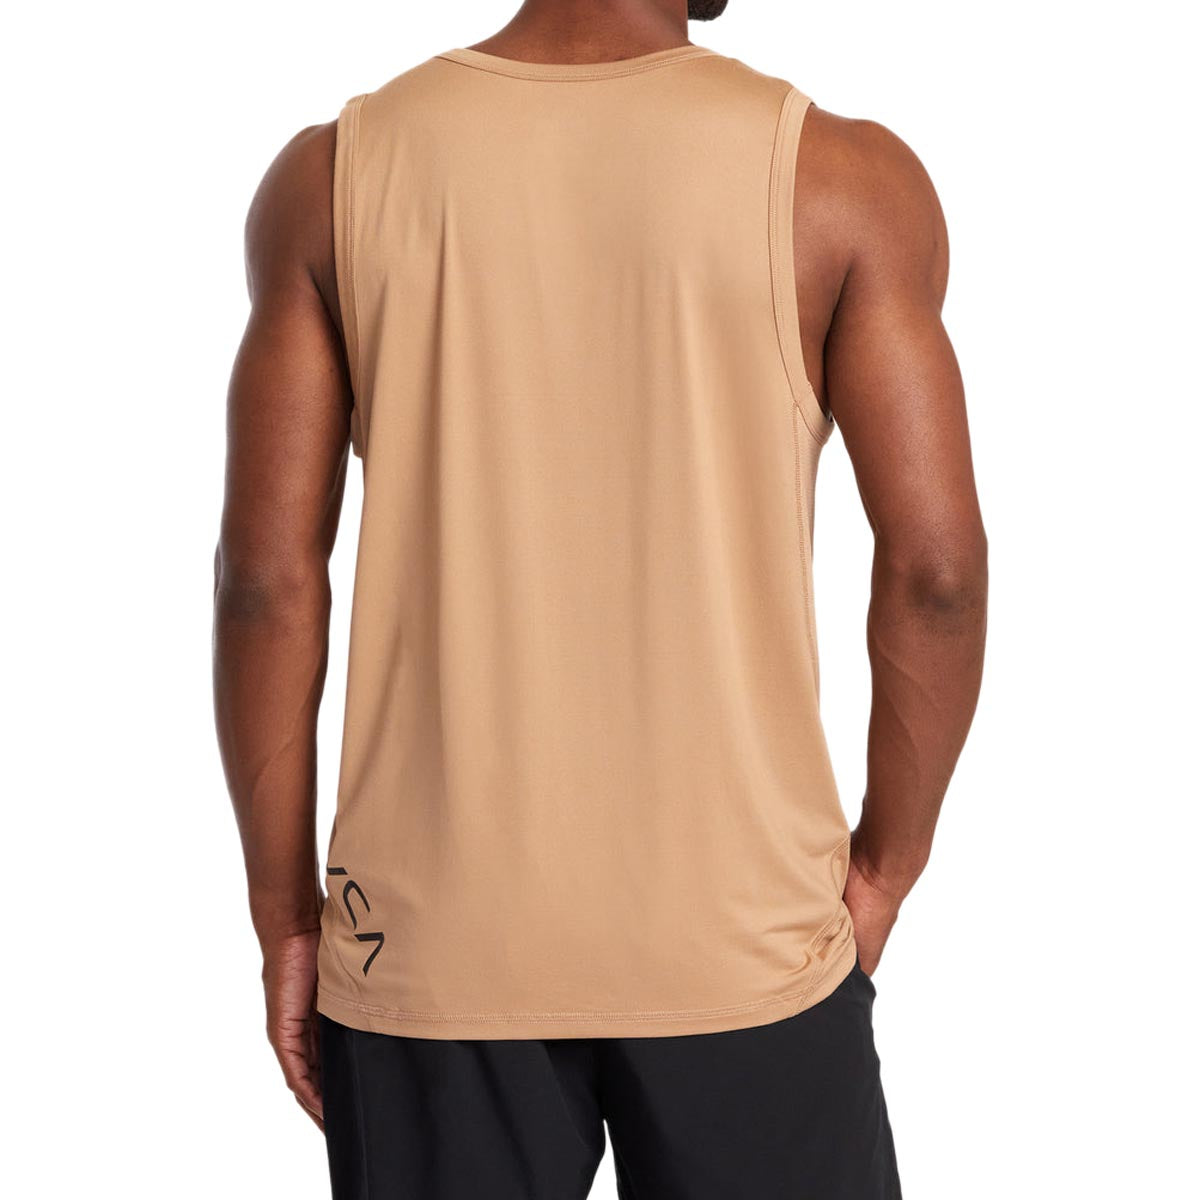 RVCA Sport Vent Sleeve Tank Top - Earth Clay image 3